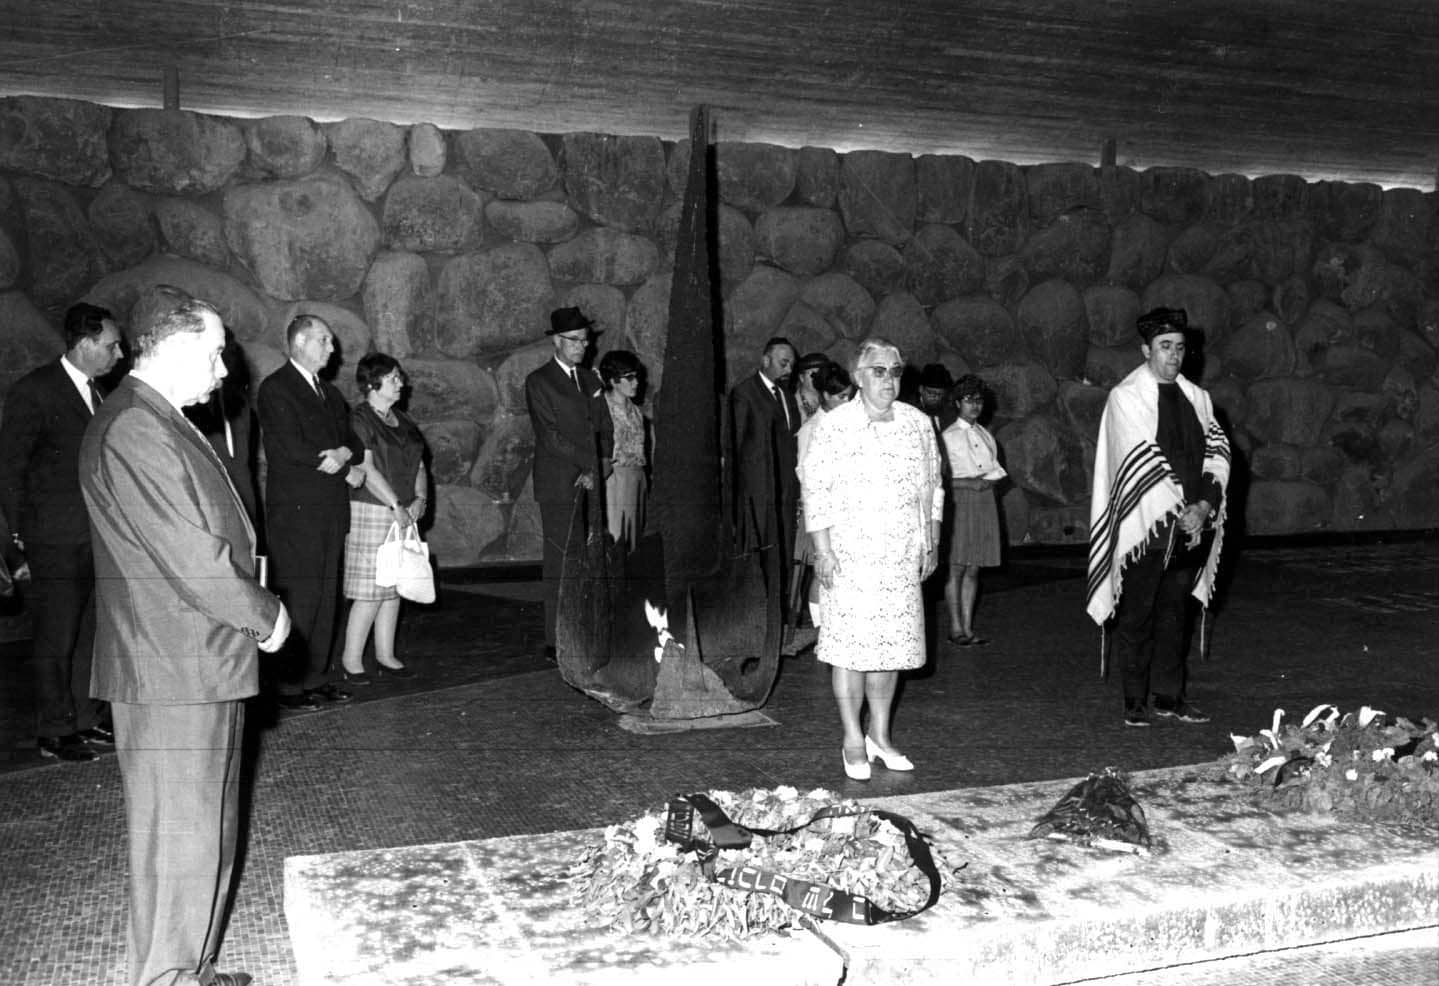 Ceremony in Honor of Wijsmuller Gertud in the Hall of Remembrance. Yad Vashem, 13.04.1967